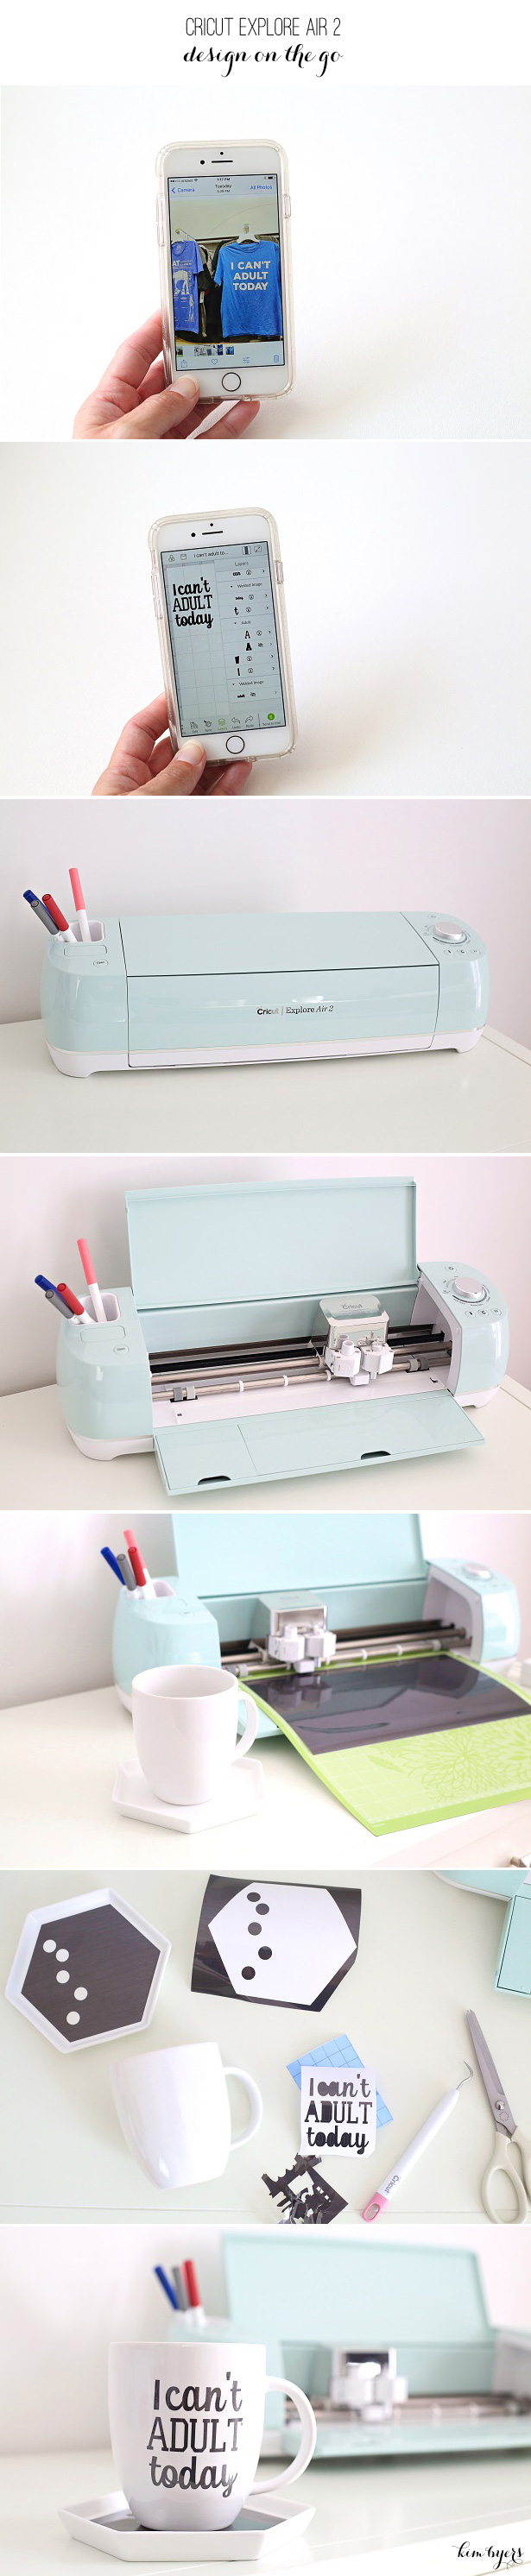 Hack Craft Projects On The Go With Cricut | Kim Byers